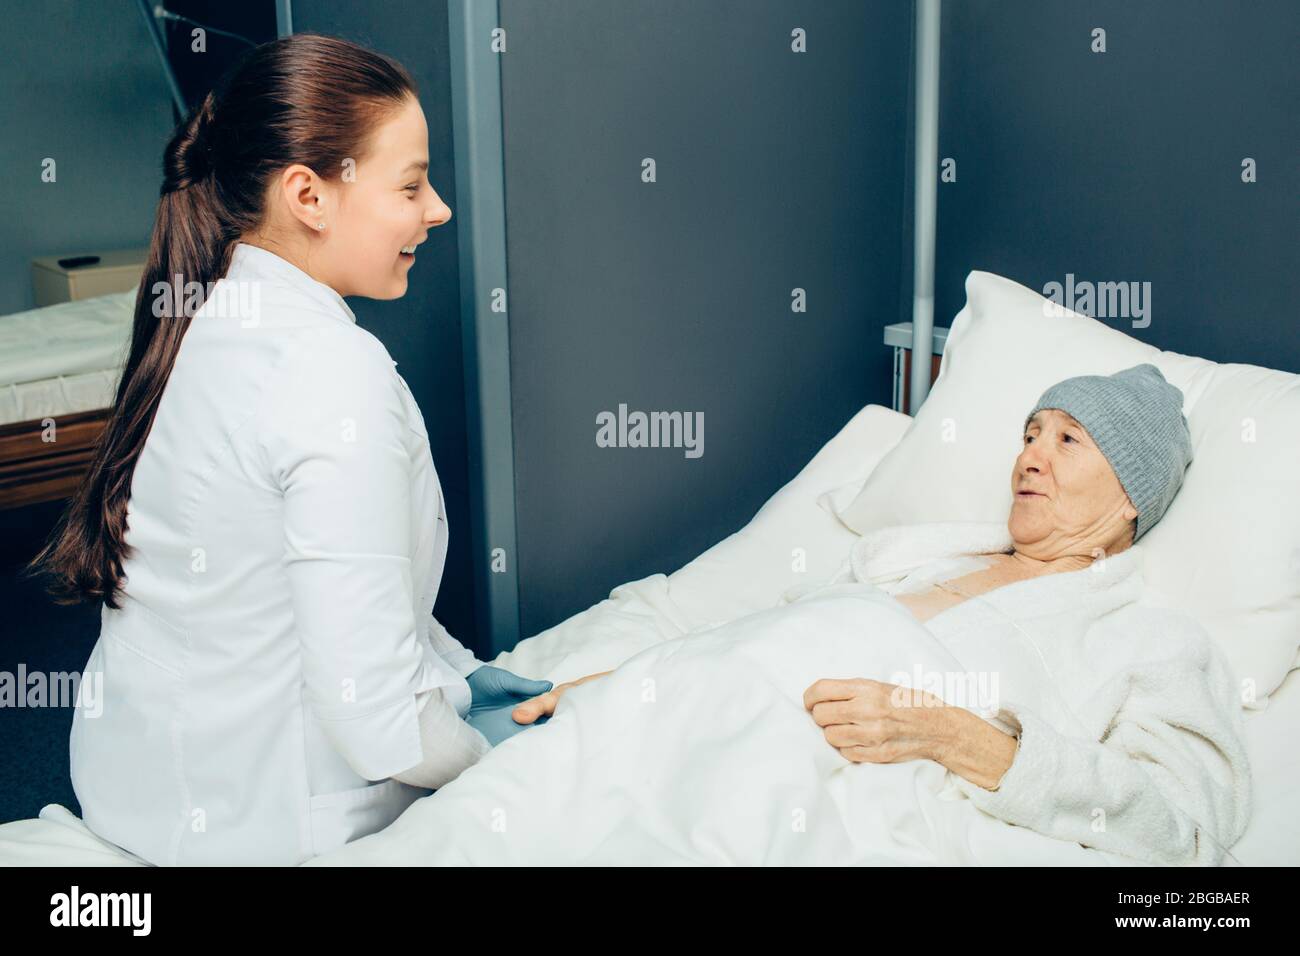 doctor communicating with a patient in a oncology clinic ward. Elderly woman receiving chemotherapy through Infusion port during cancer treatment Stock Photo